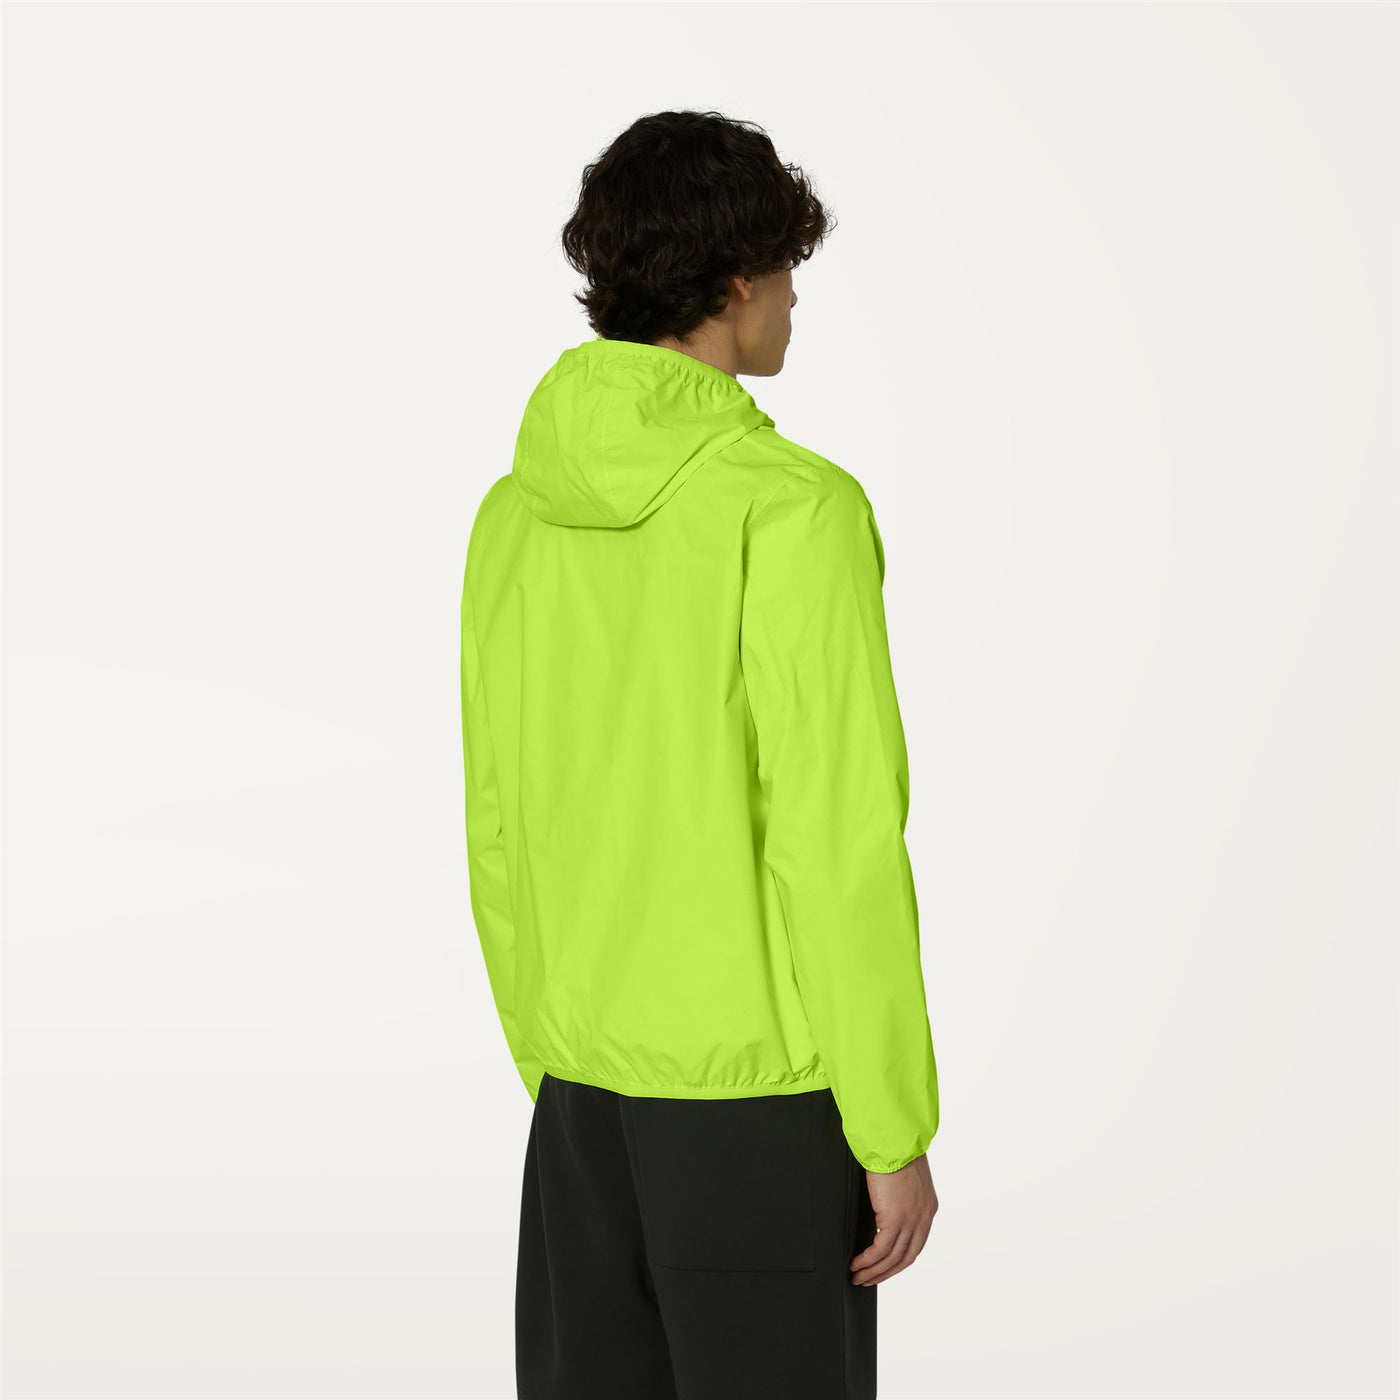 Jackets Man Jacques Plus Double Fluo Short YELLOW FLUO-GREY Dressed Front Double		